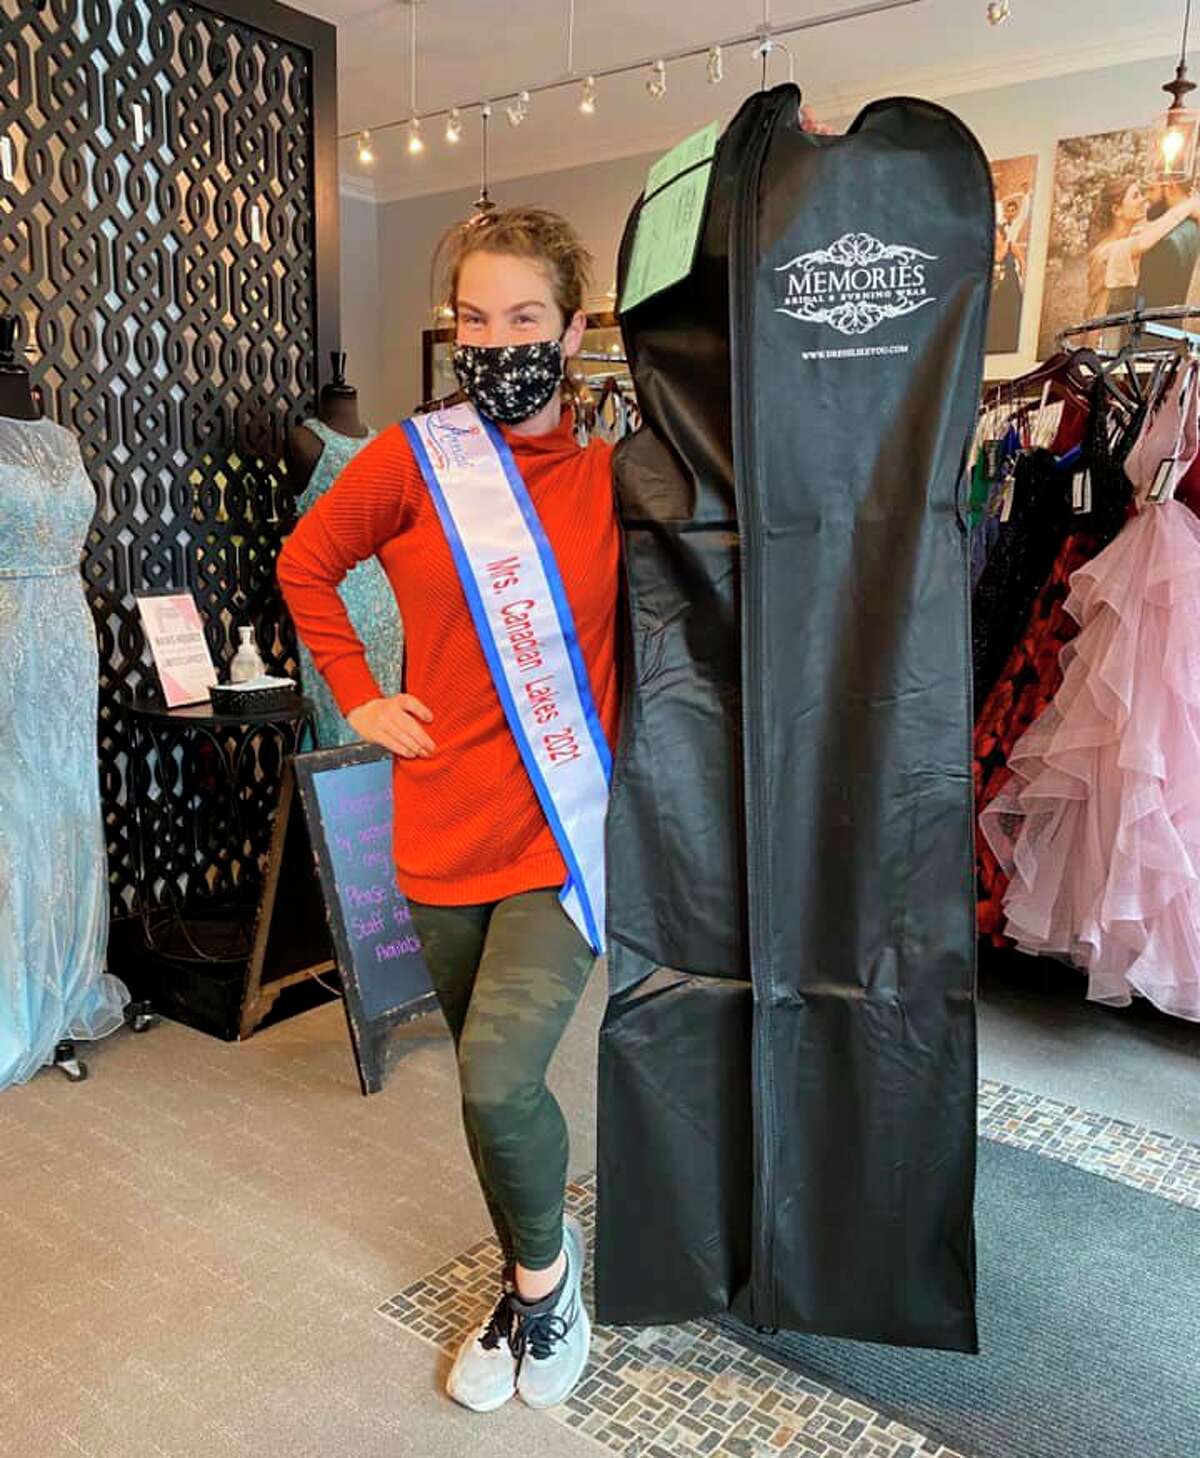 Jackie Blankenship, who will represent Mrs. Canadian Lakes in this year's Mrs. Michigan for America Pageant, is pictured at her favorite dress shop, Memories Bridal & Evening Wear, in Kalamazoo picking up her evening gown for the pageant. (Courtesy photo)